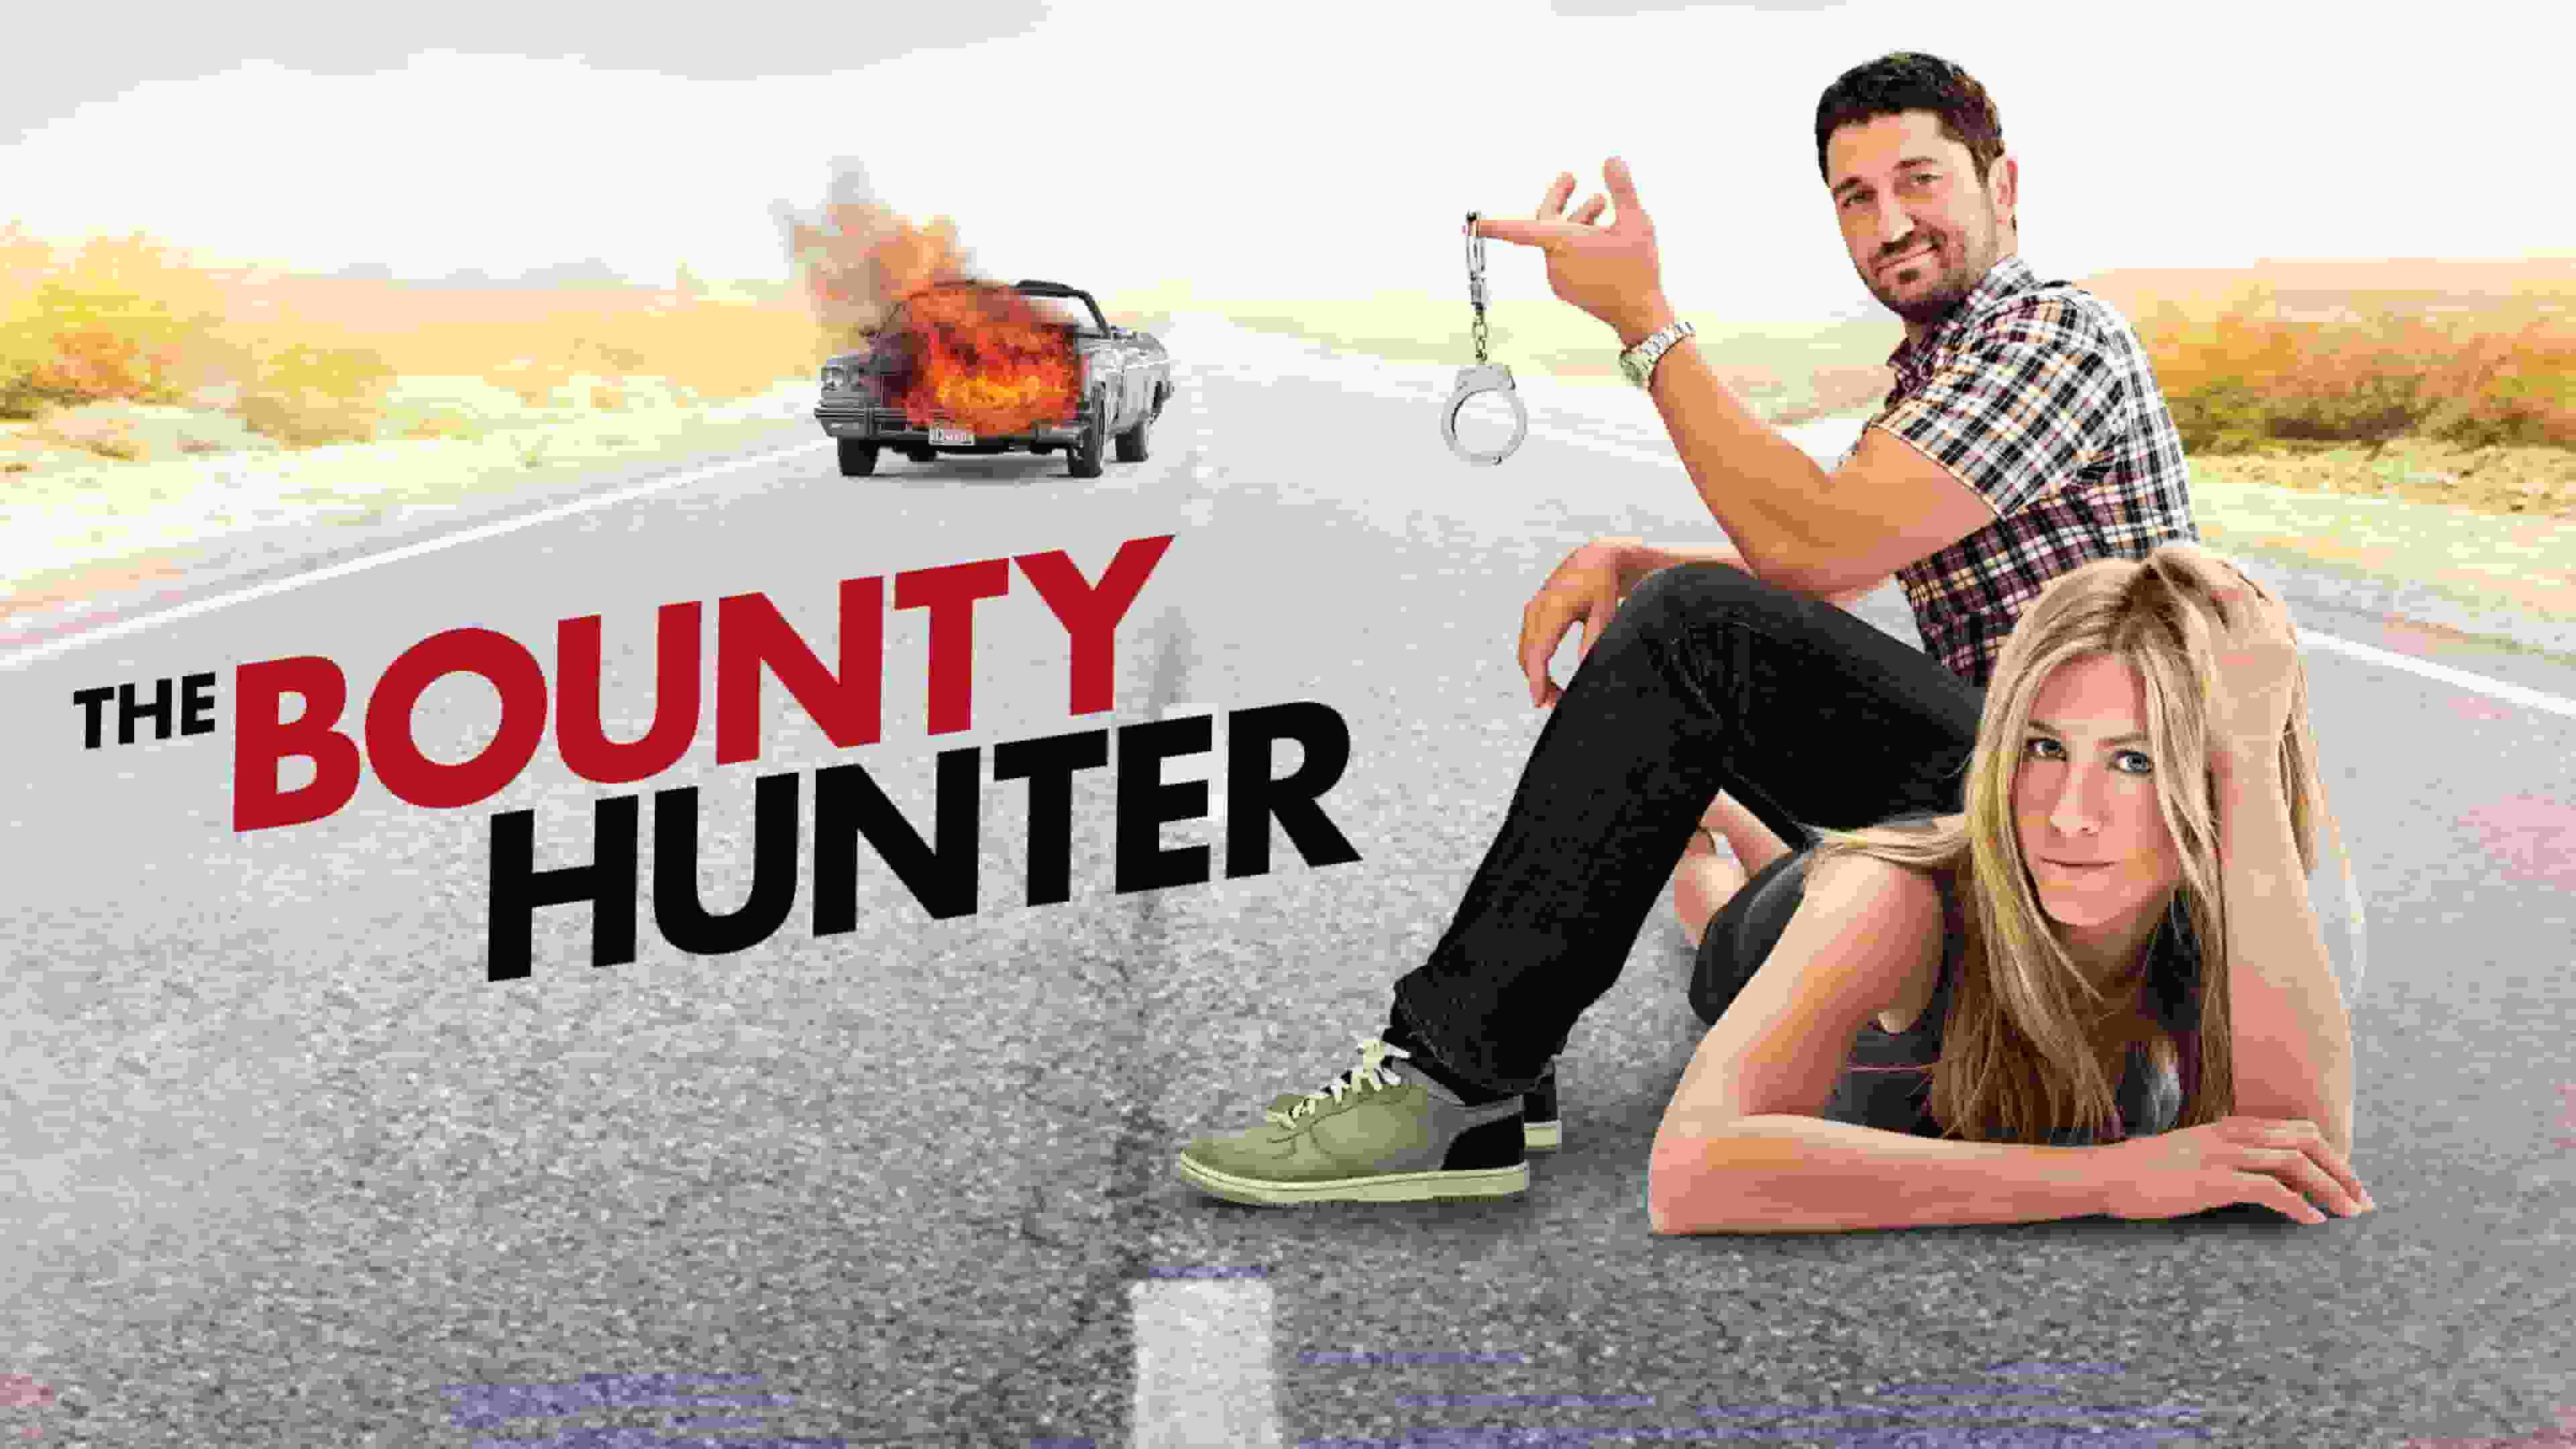 Title art for action comedy Bounty Hunter